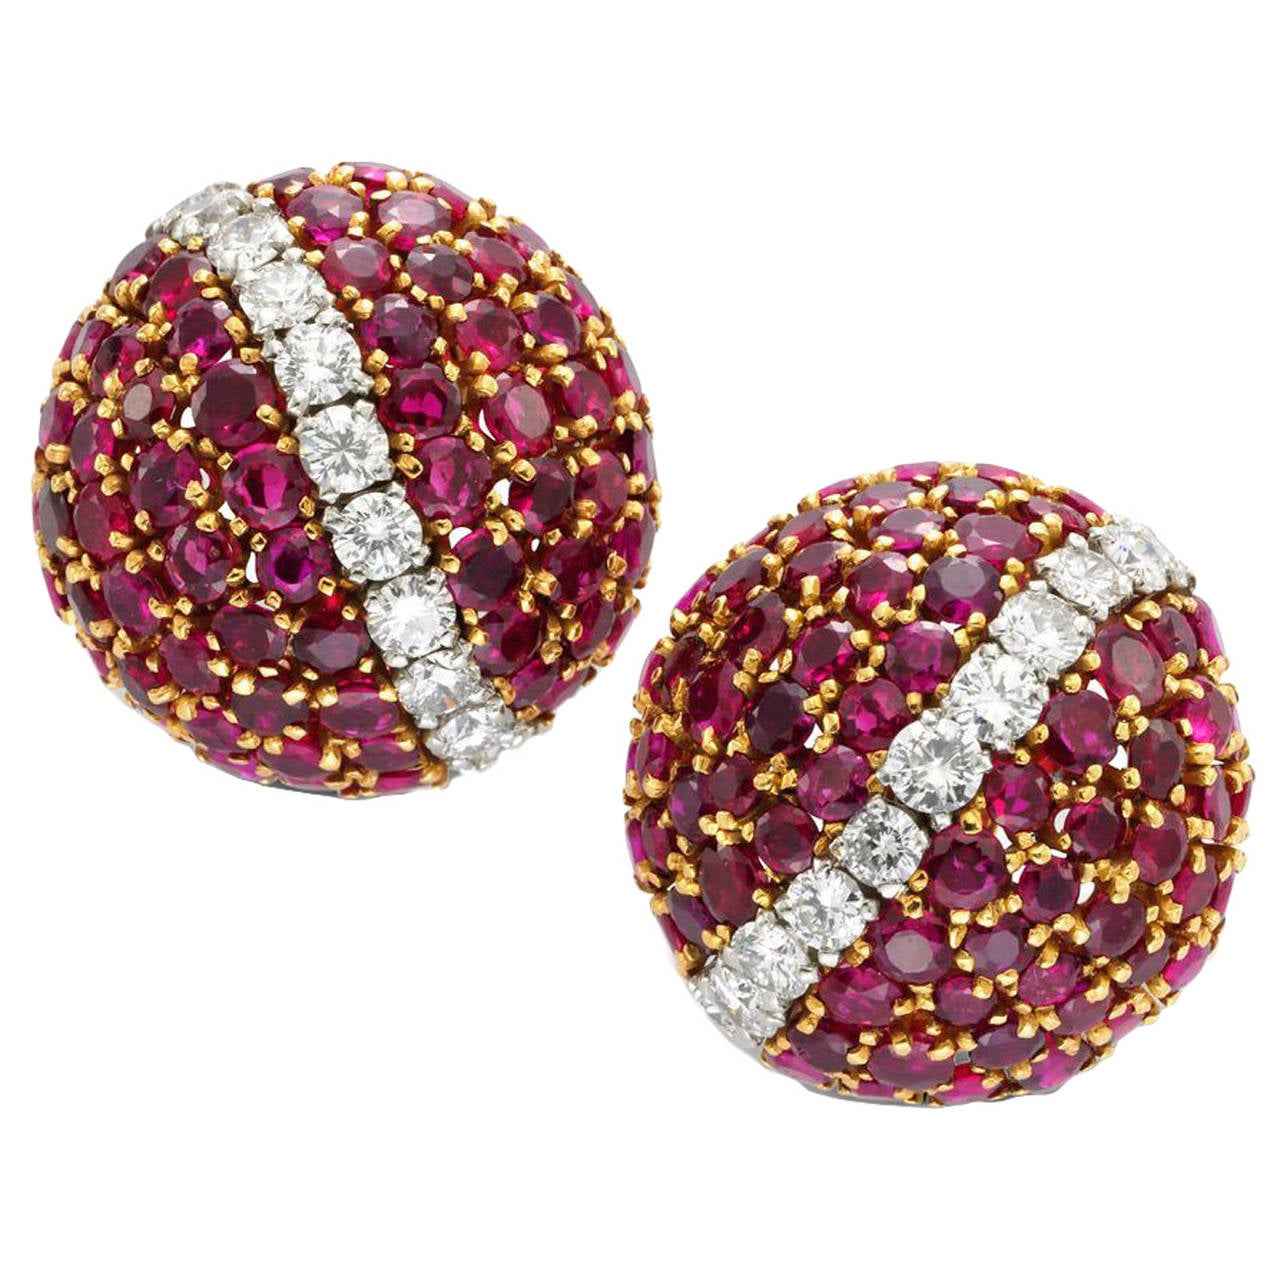 Van Cleef & Arpels, A Pair of Ruby and Diamond Ear Clips For Sale